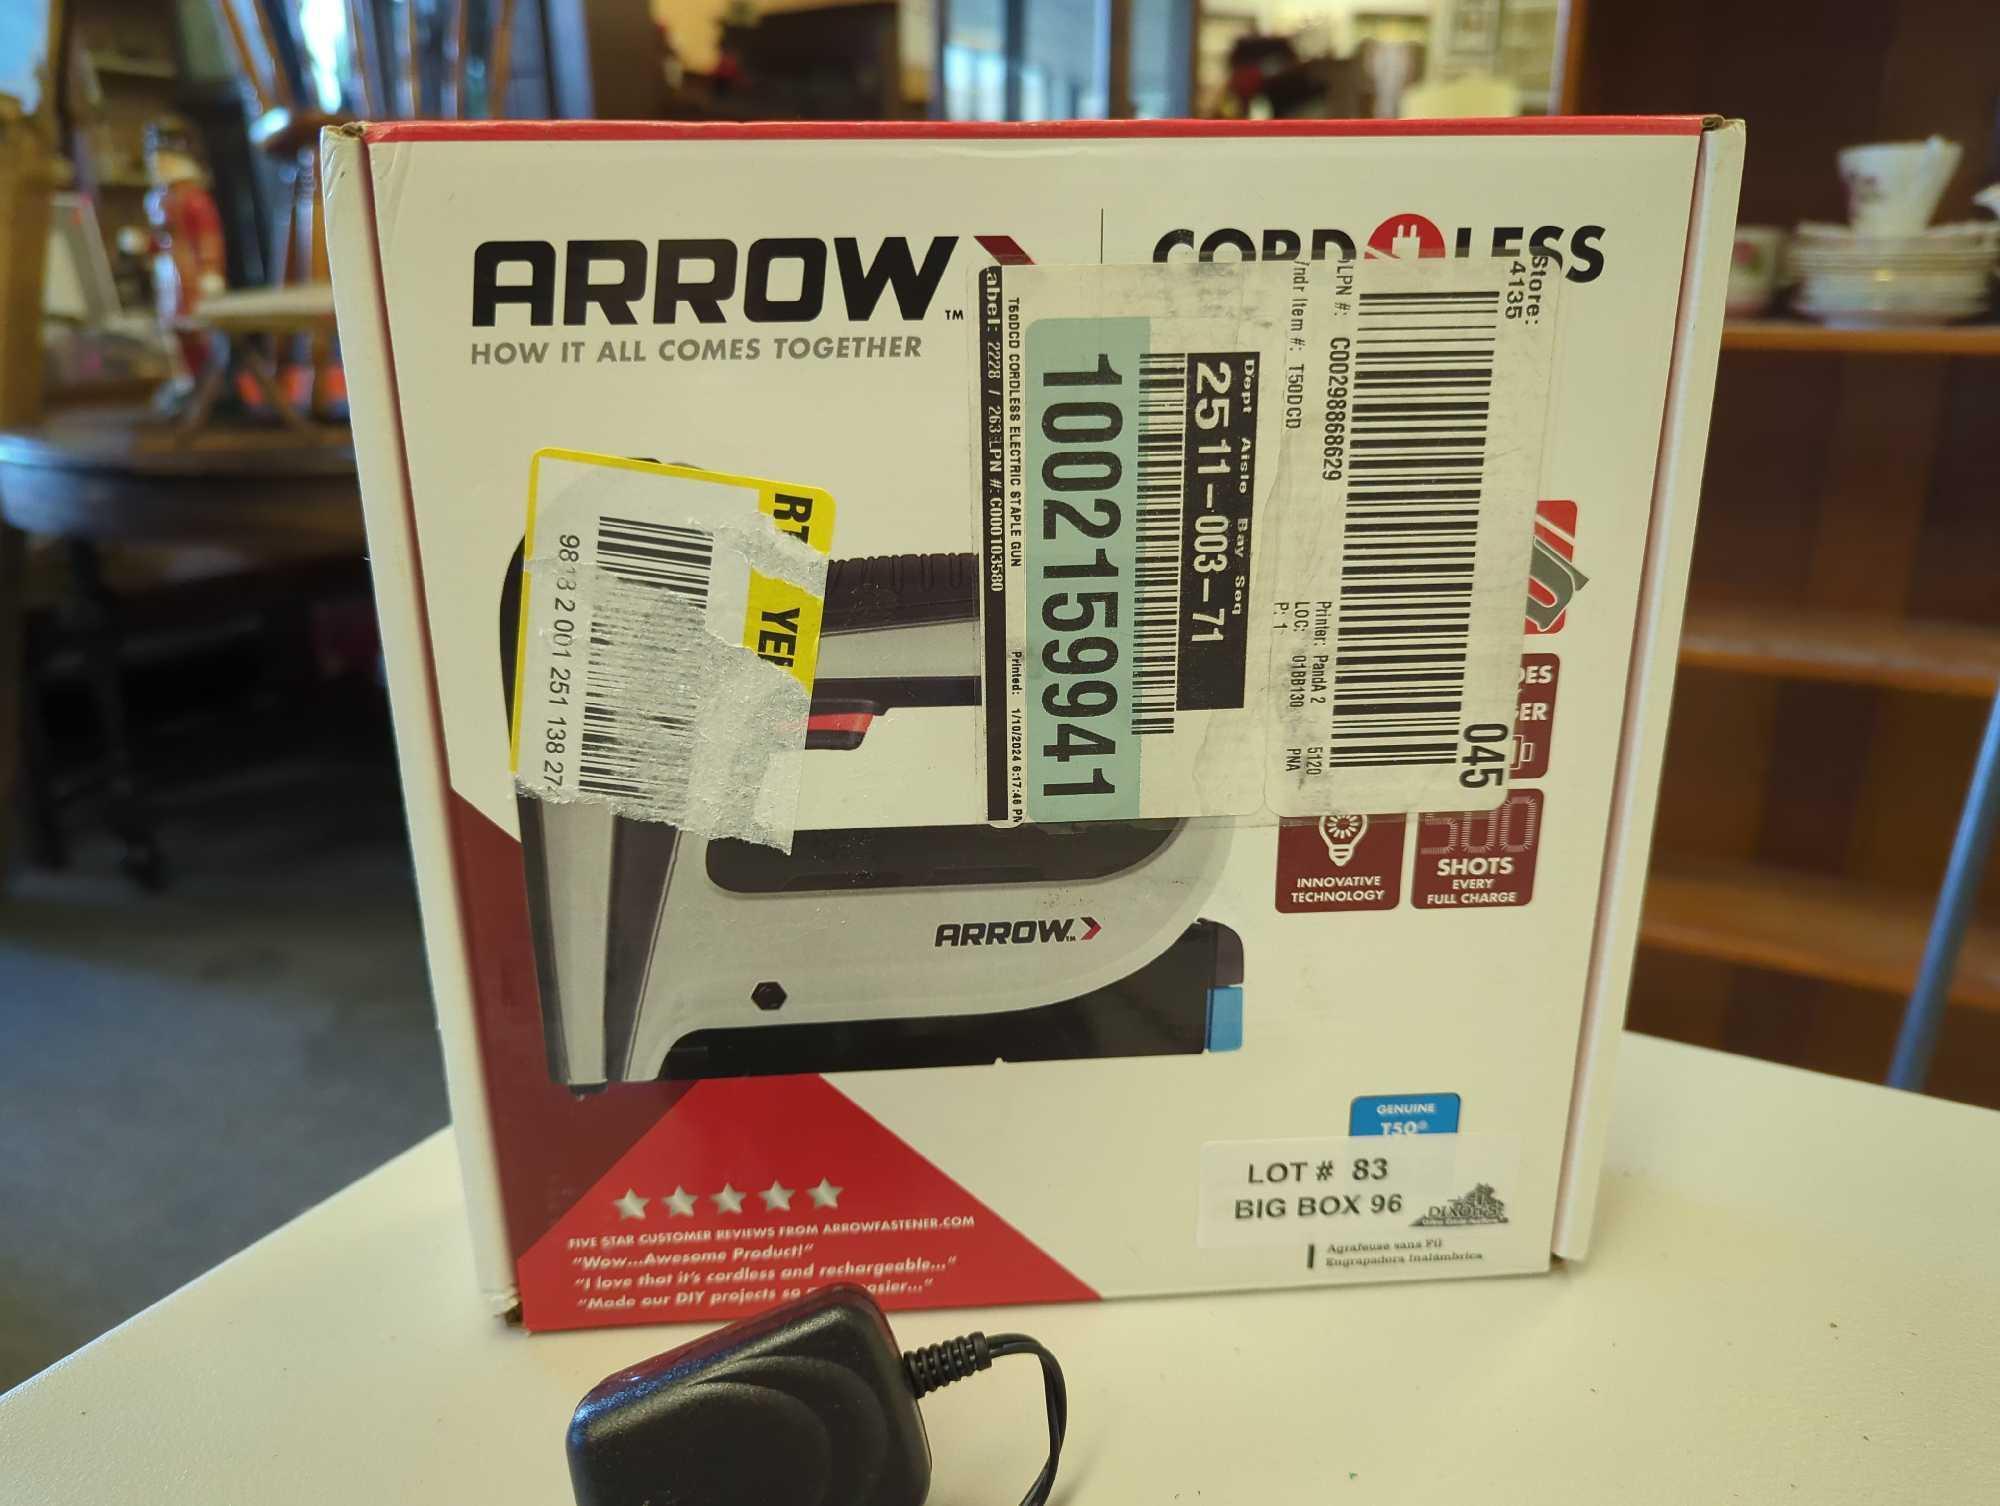 Arrow T50DCD Cordless Staple Gun. Comes as is shown in photos. Appears to be used. SKU # 1002159941